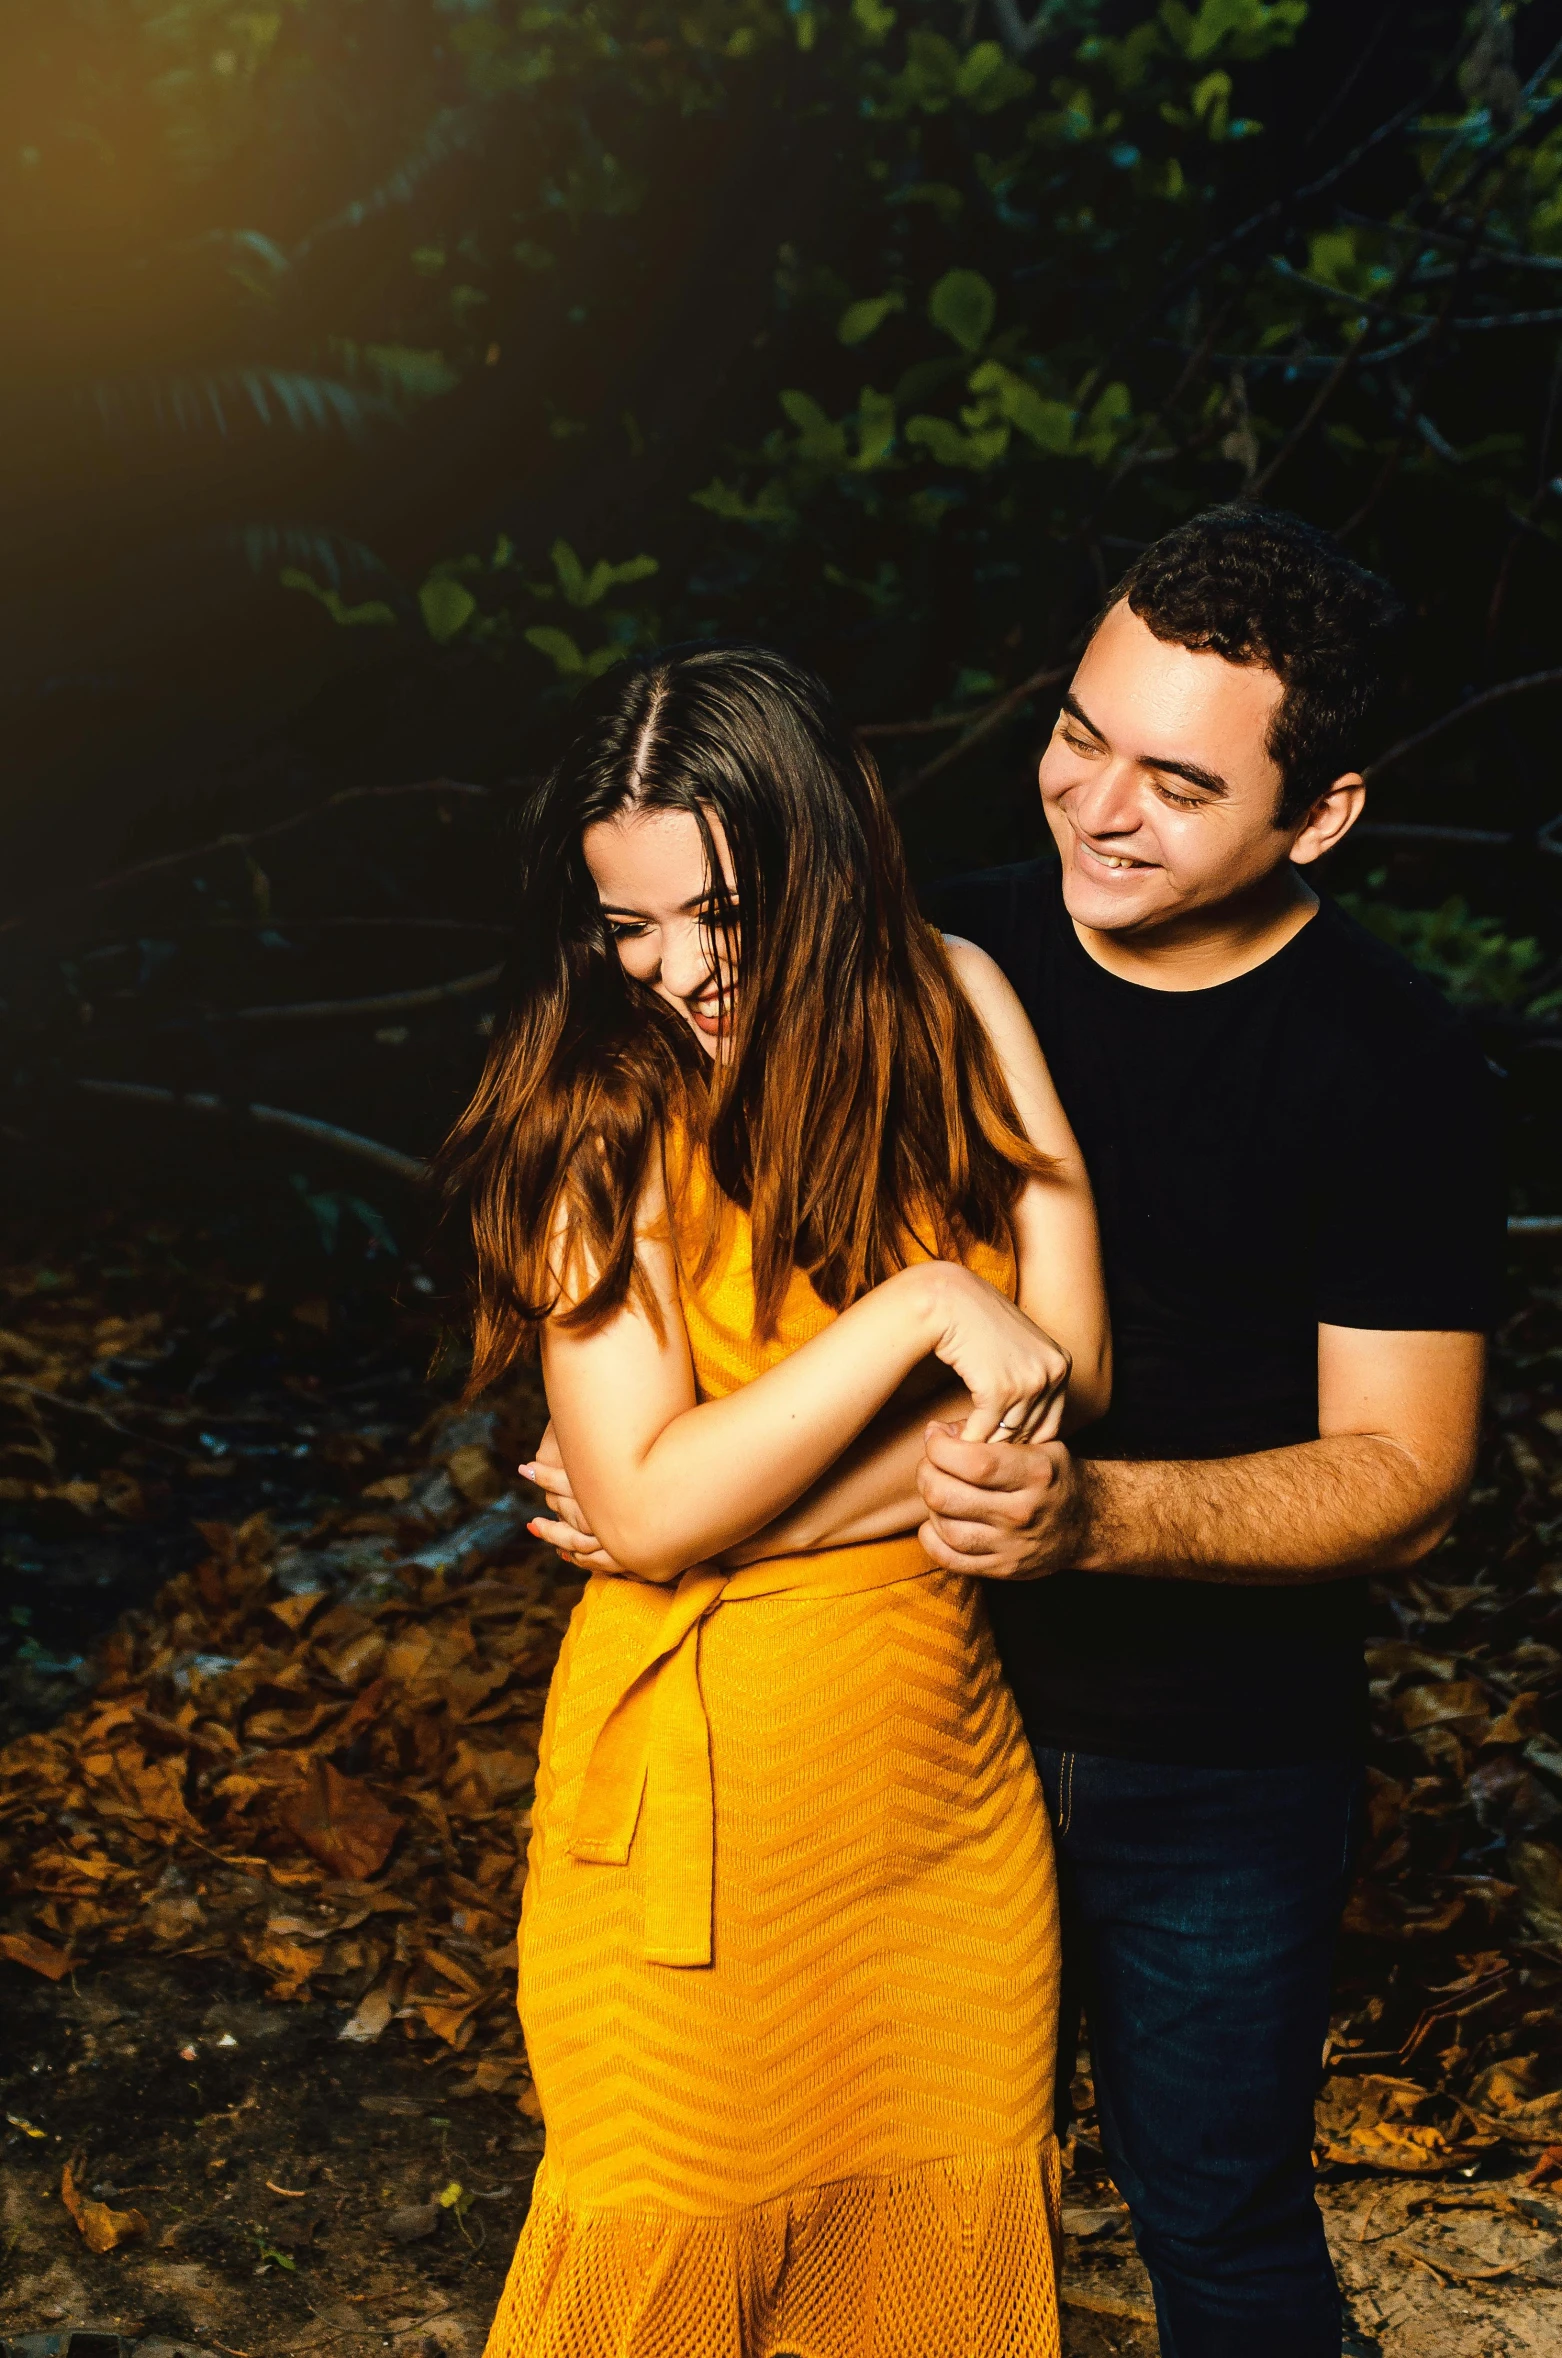 a man standing next to a woman in a yellow dress, a picture, pexels contest winner, man grabbing a womans waist, hispanic, warm glow, photograph captured in the woods